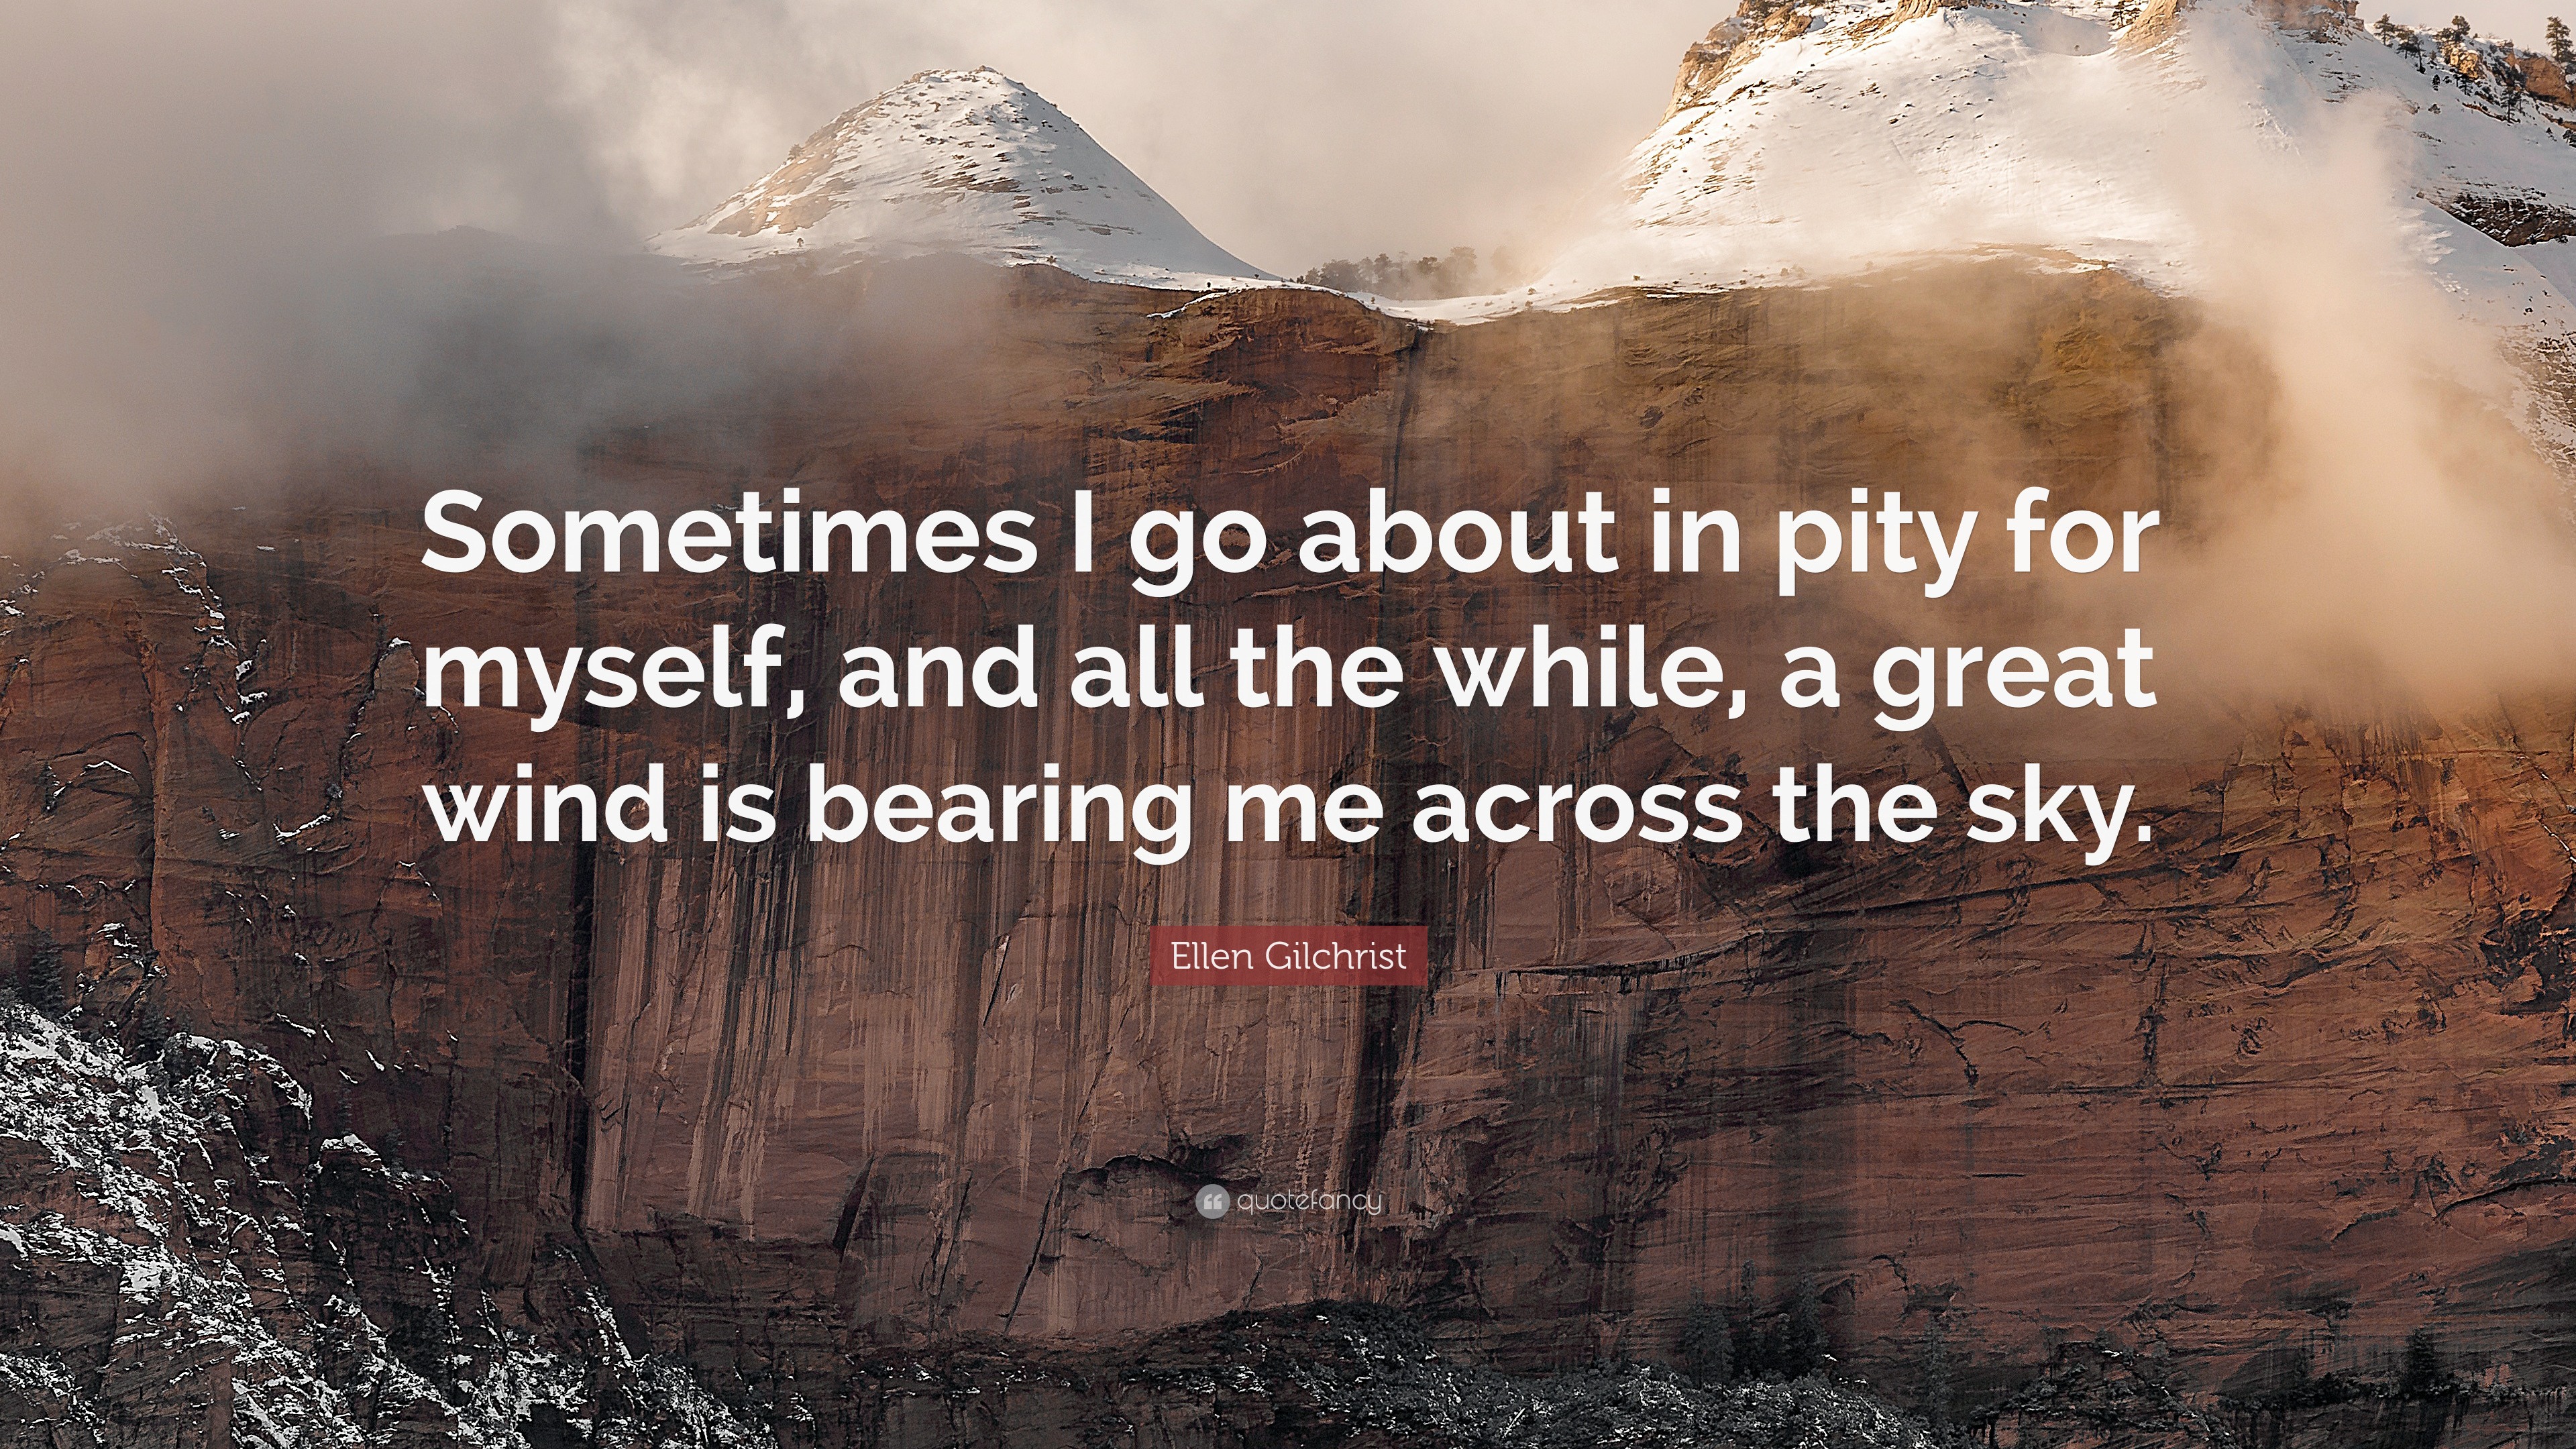 Ellen Gilchrist Quote: “Sometimes I go about in pity for myself, and